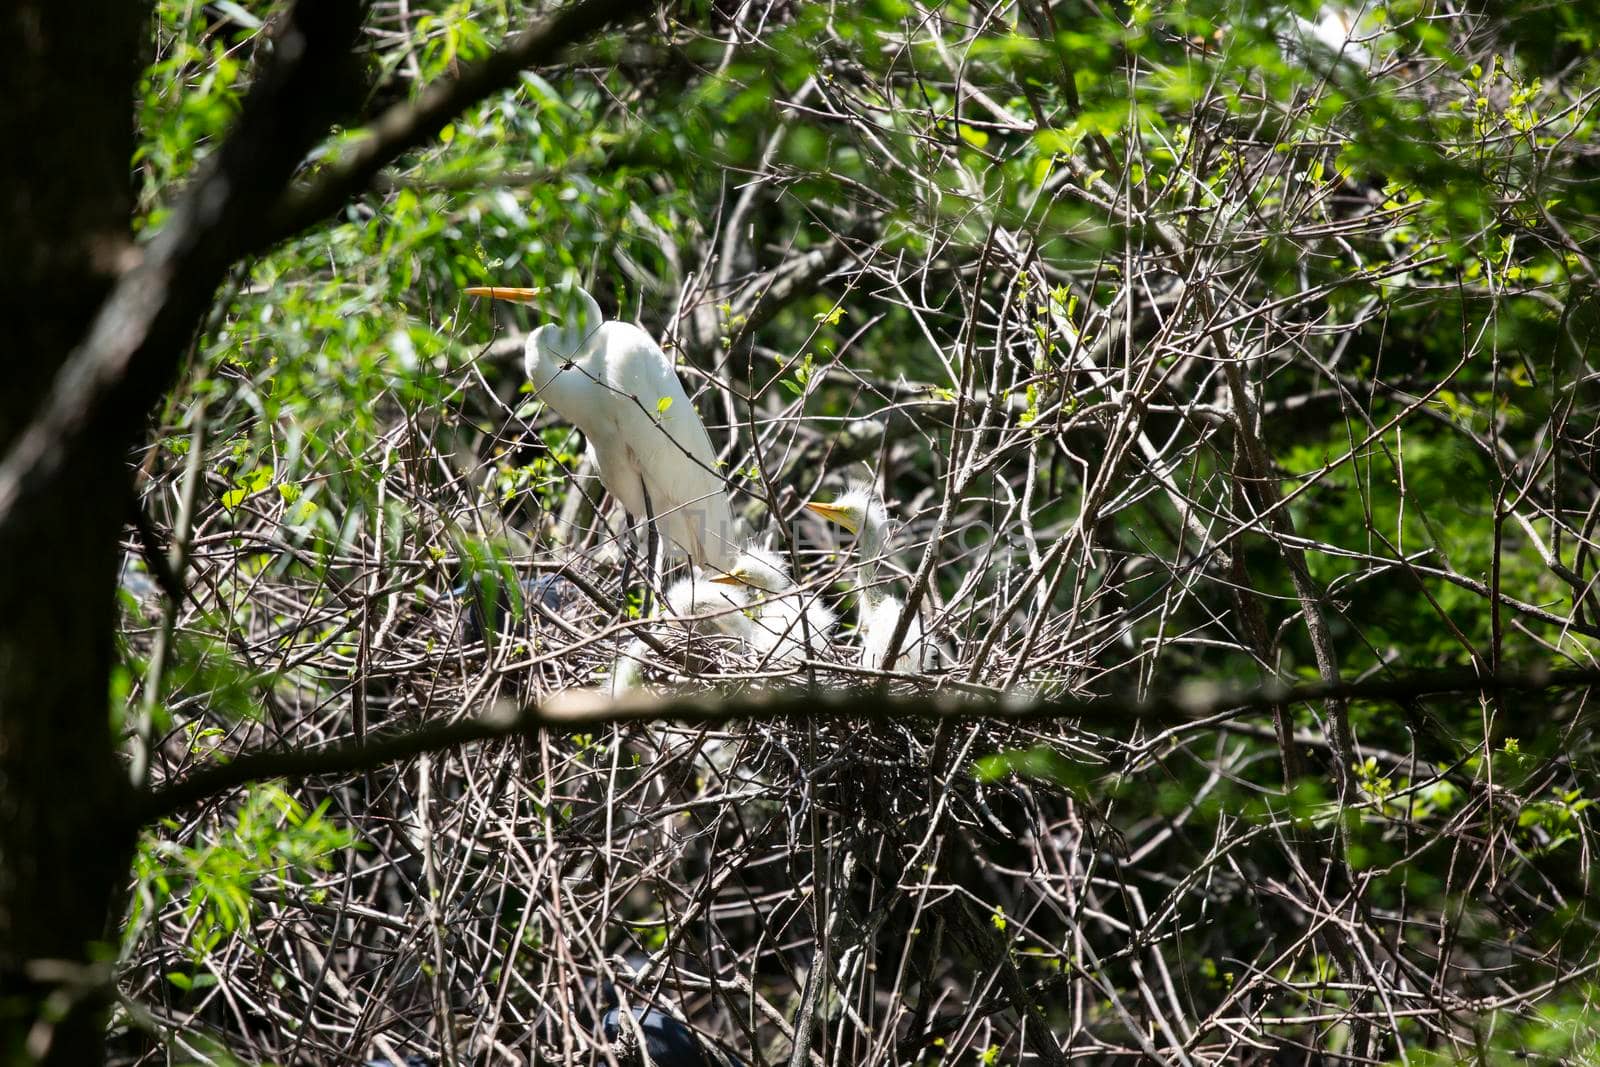 Great Egret Watching over Its Chicks by tornado98